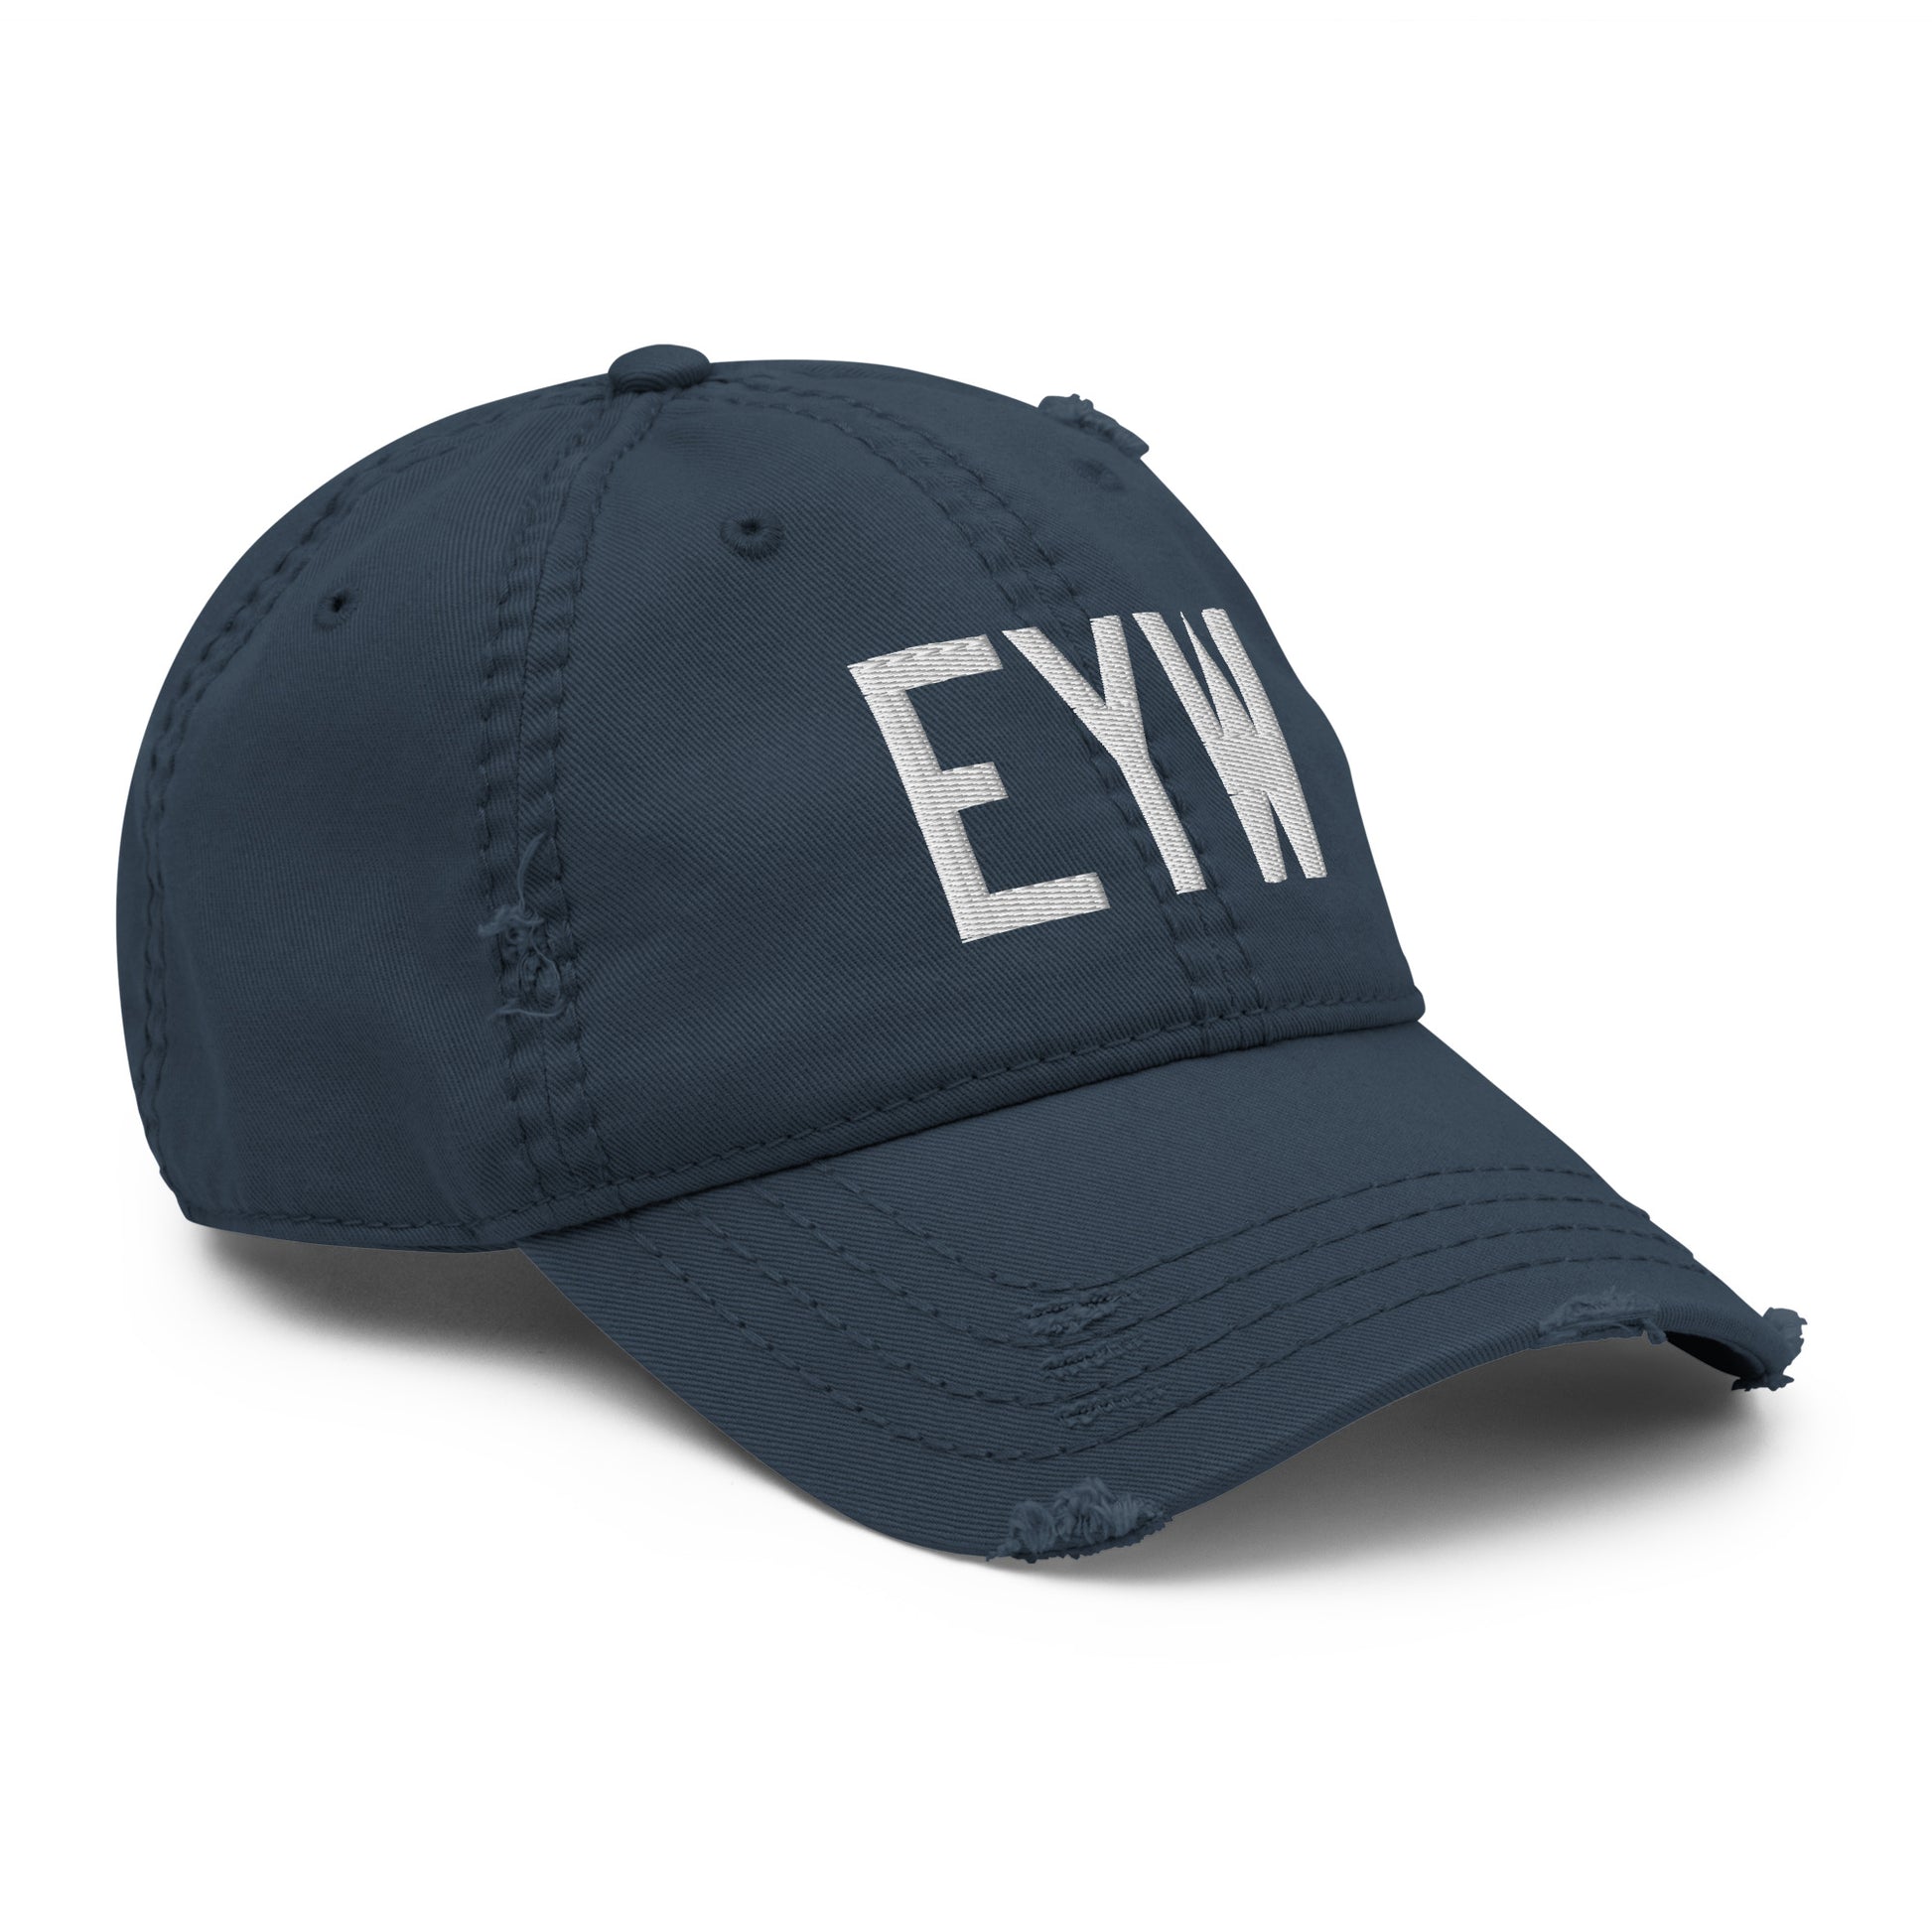 Airport Code Distressed Hat - White • EYW Key West • YHM Designs - Image 14